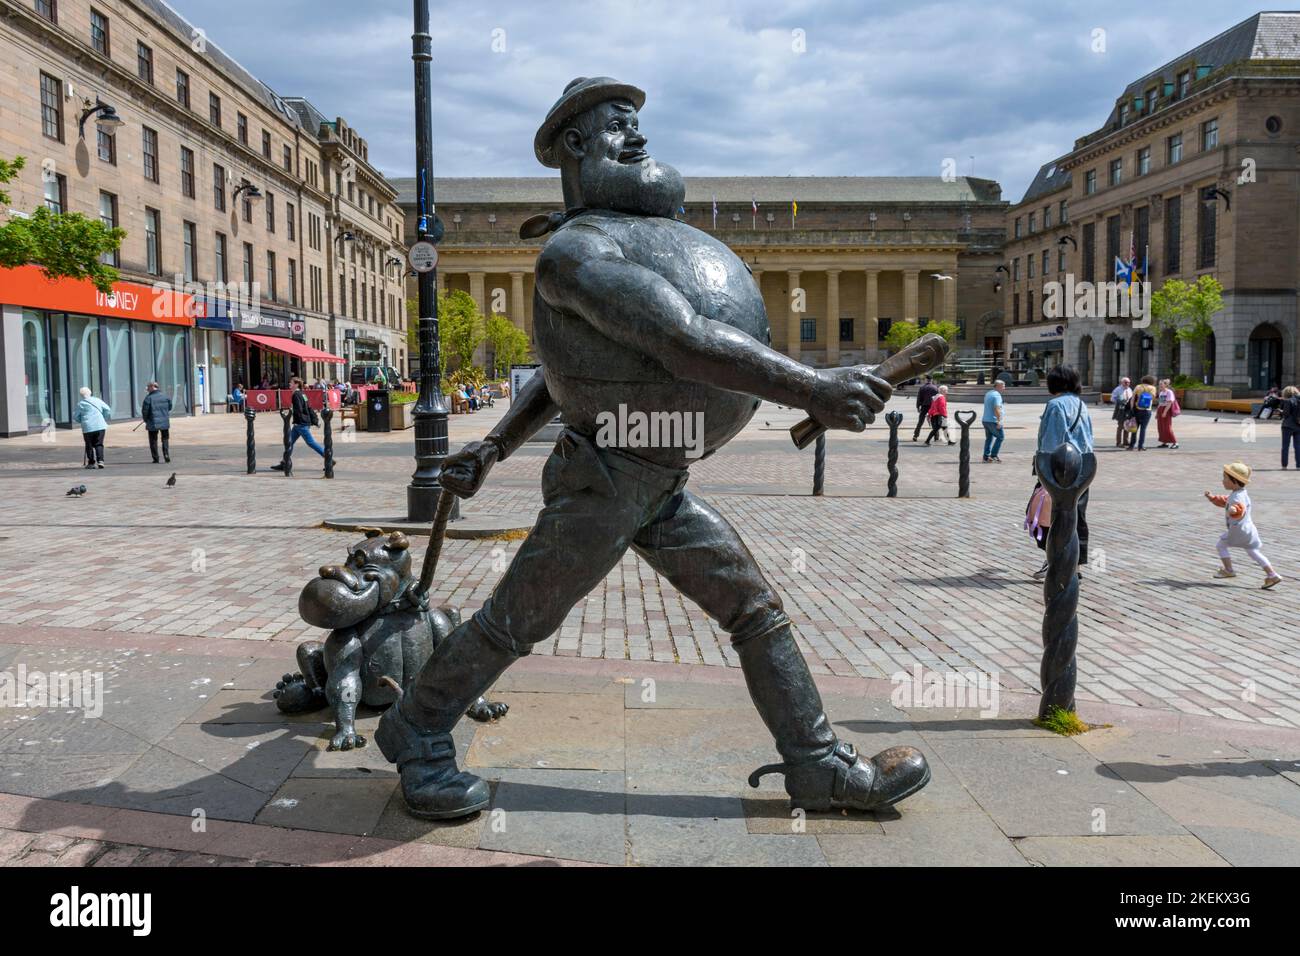 Statue of Desperate Dan and his dog Dawg, characters in the children's comic magazine The Dandy.  High Street, Dundee, Scotland, UK Stock Photo